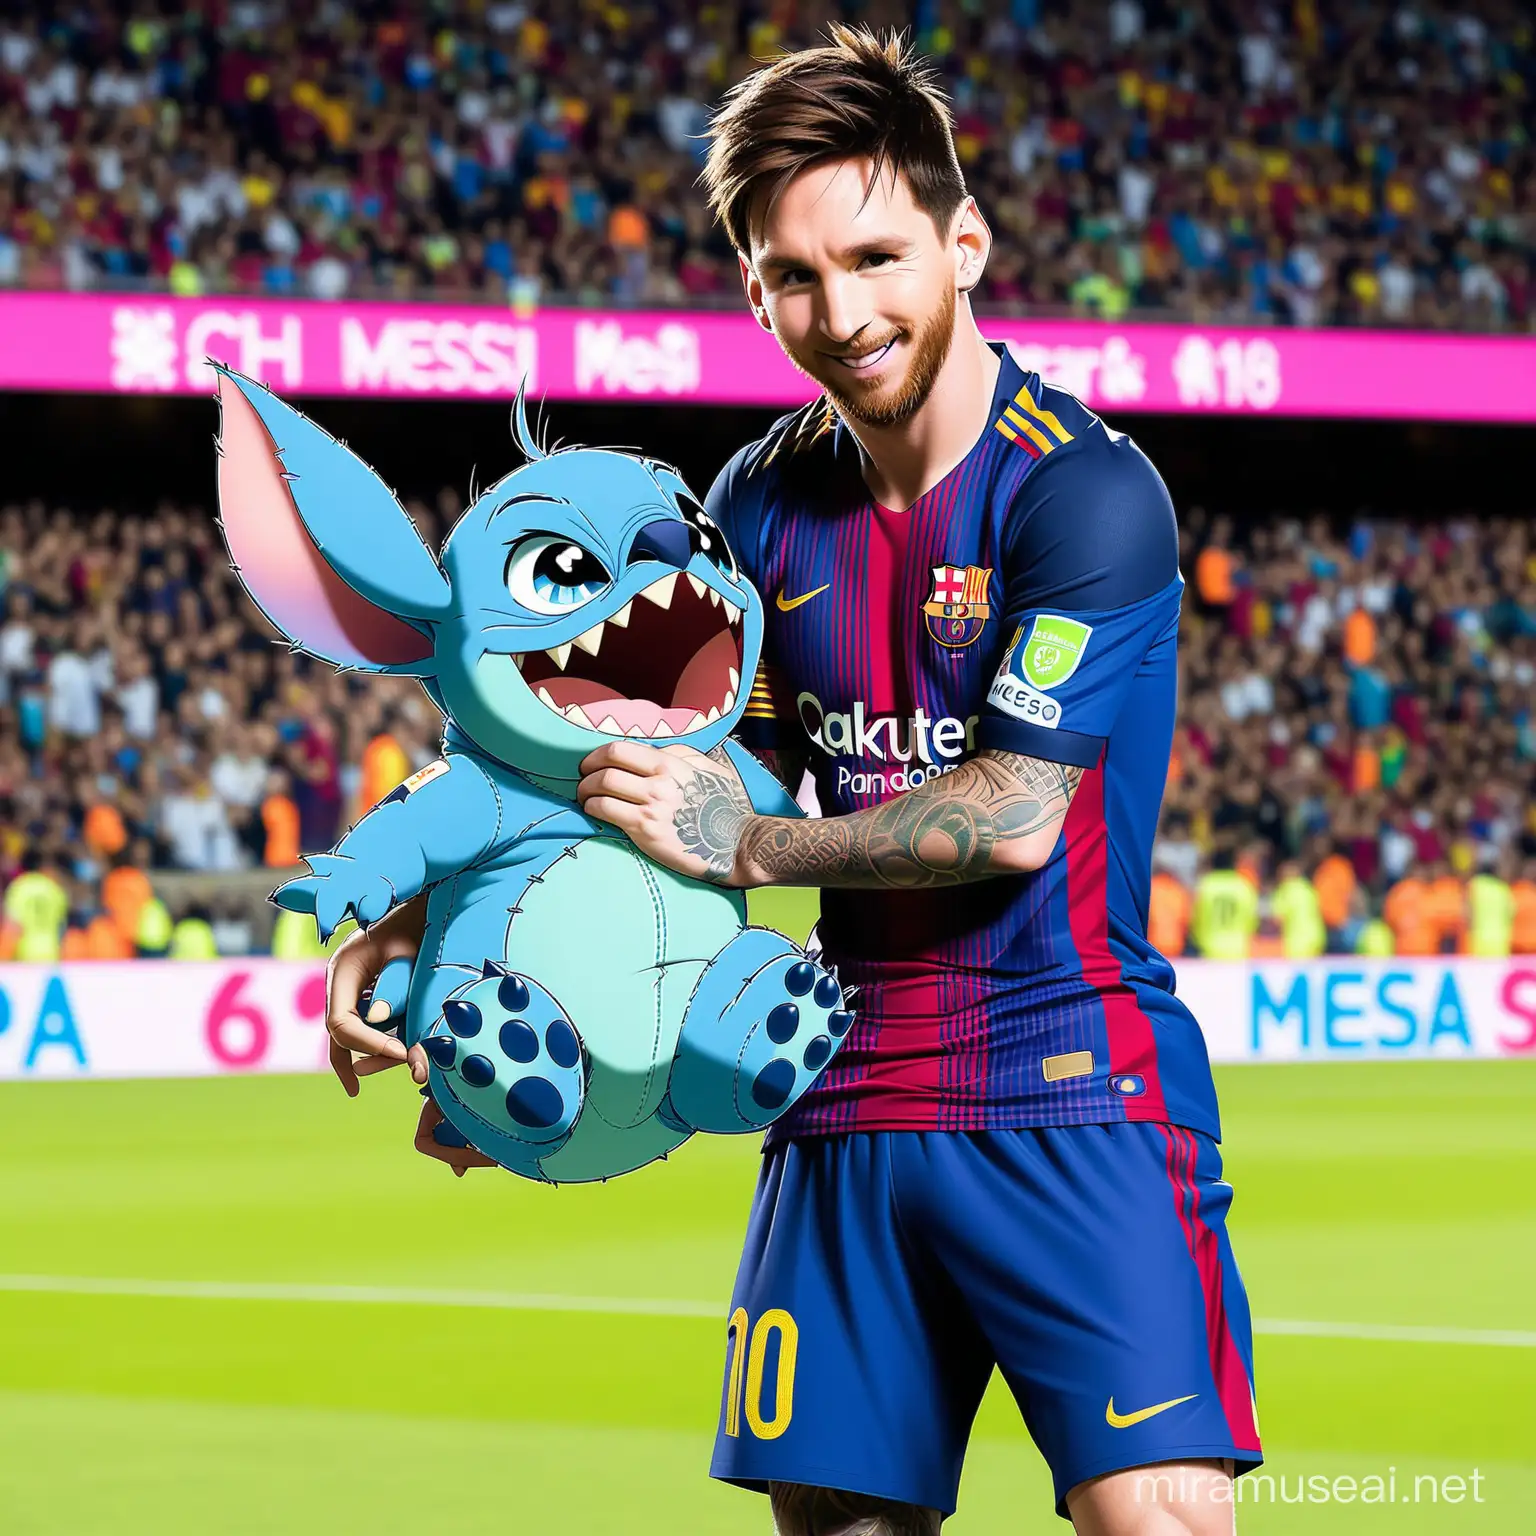 Stitch Sewing a Soccer Ball with Messi